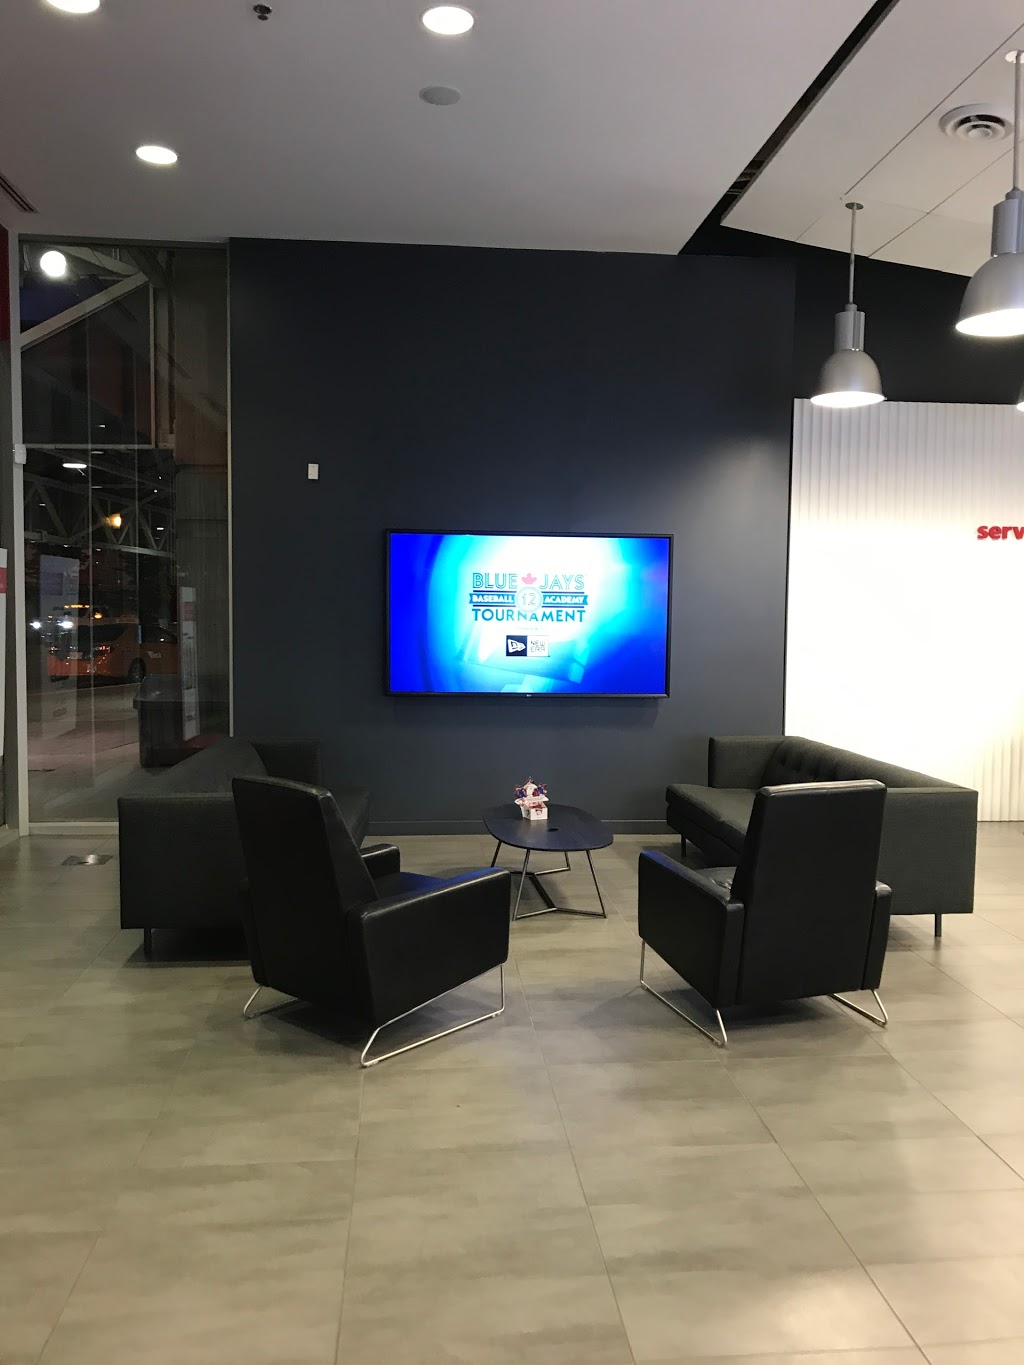 Rogers (Limited Access During Events) | store | 1 Blue Jays Way Rogers Centre, Gate 8, Suite 1200, Toronto, ON M5V 1J1, Canada | 4163411800 OR +1 416-341-1800